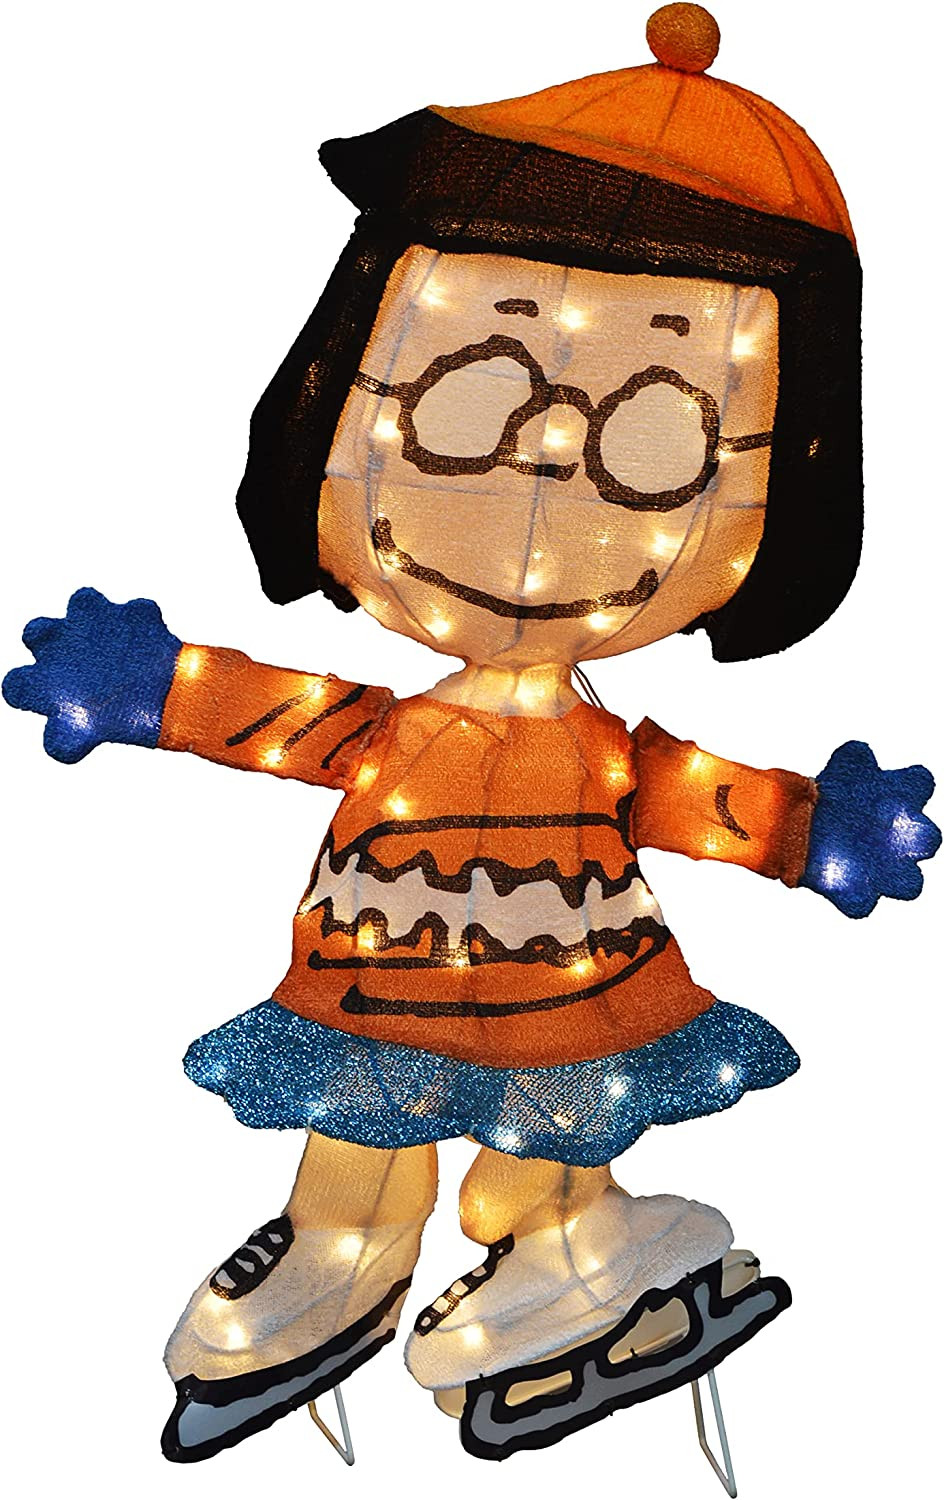 Peanuts Gang Ice Skating Marcie 32" 3D LED "A Charlie Brown Christmas" Decorations